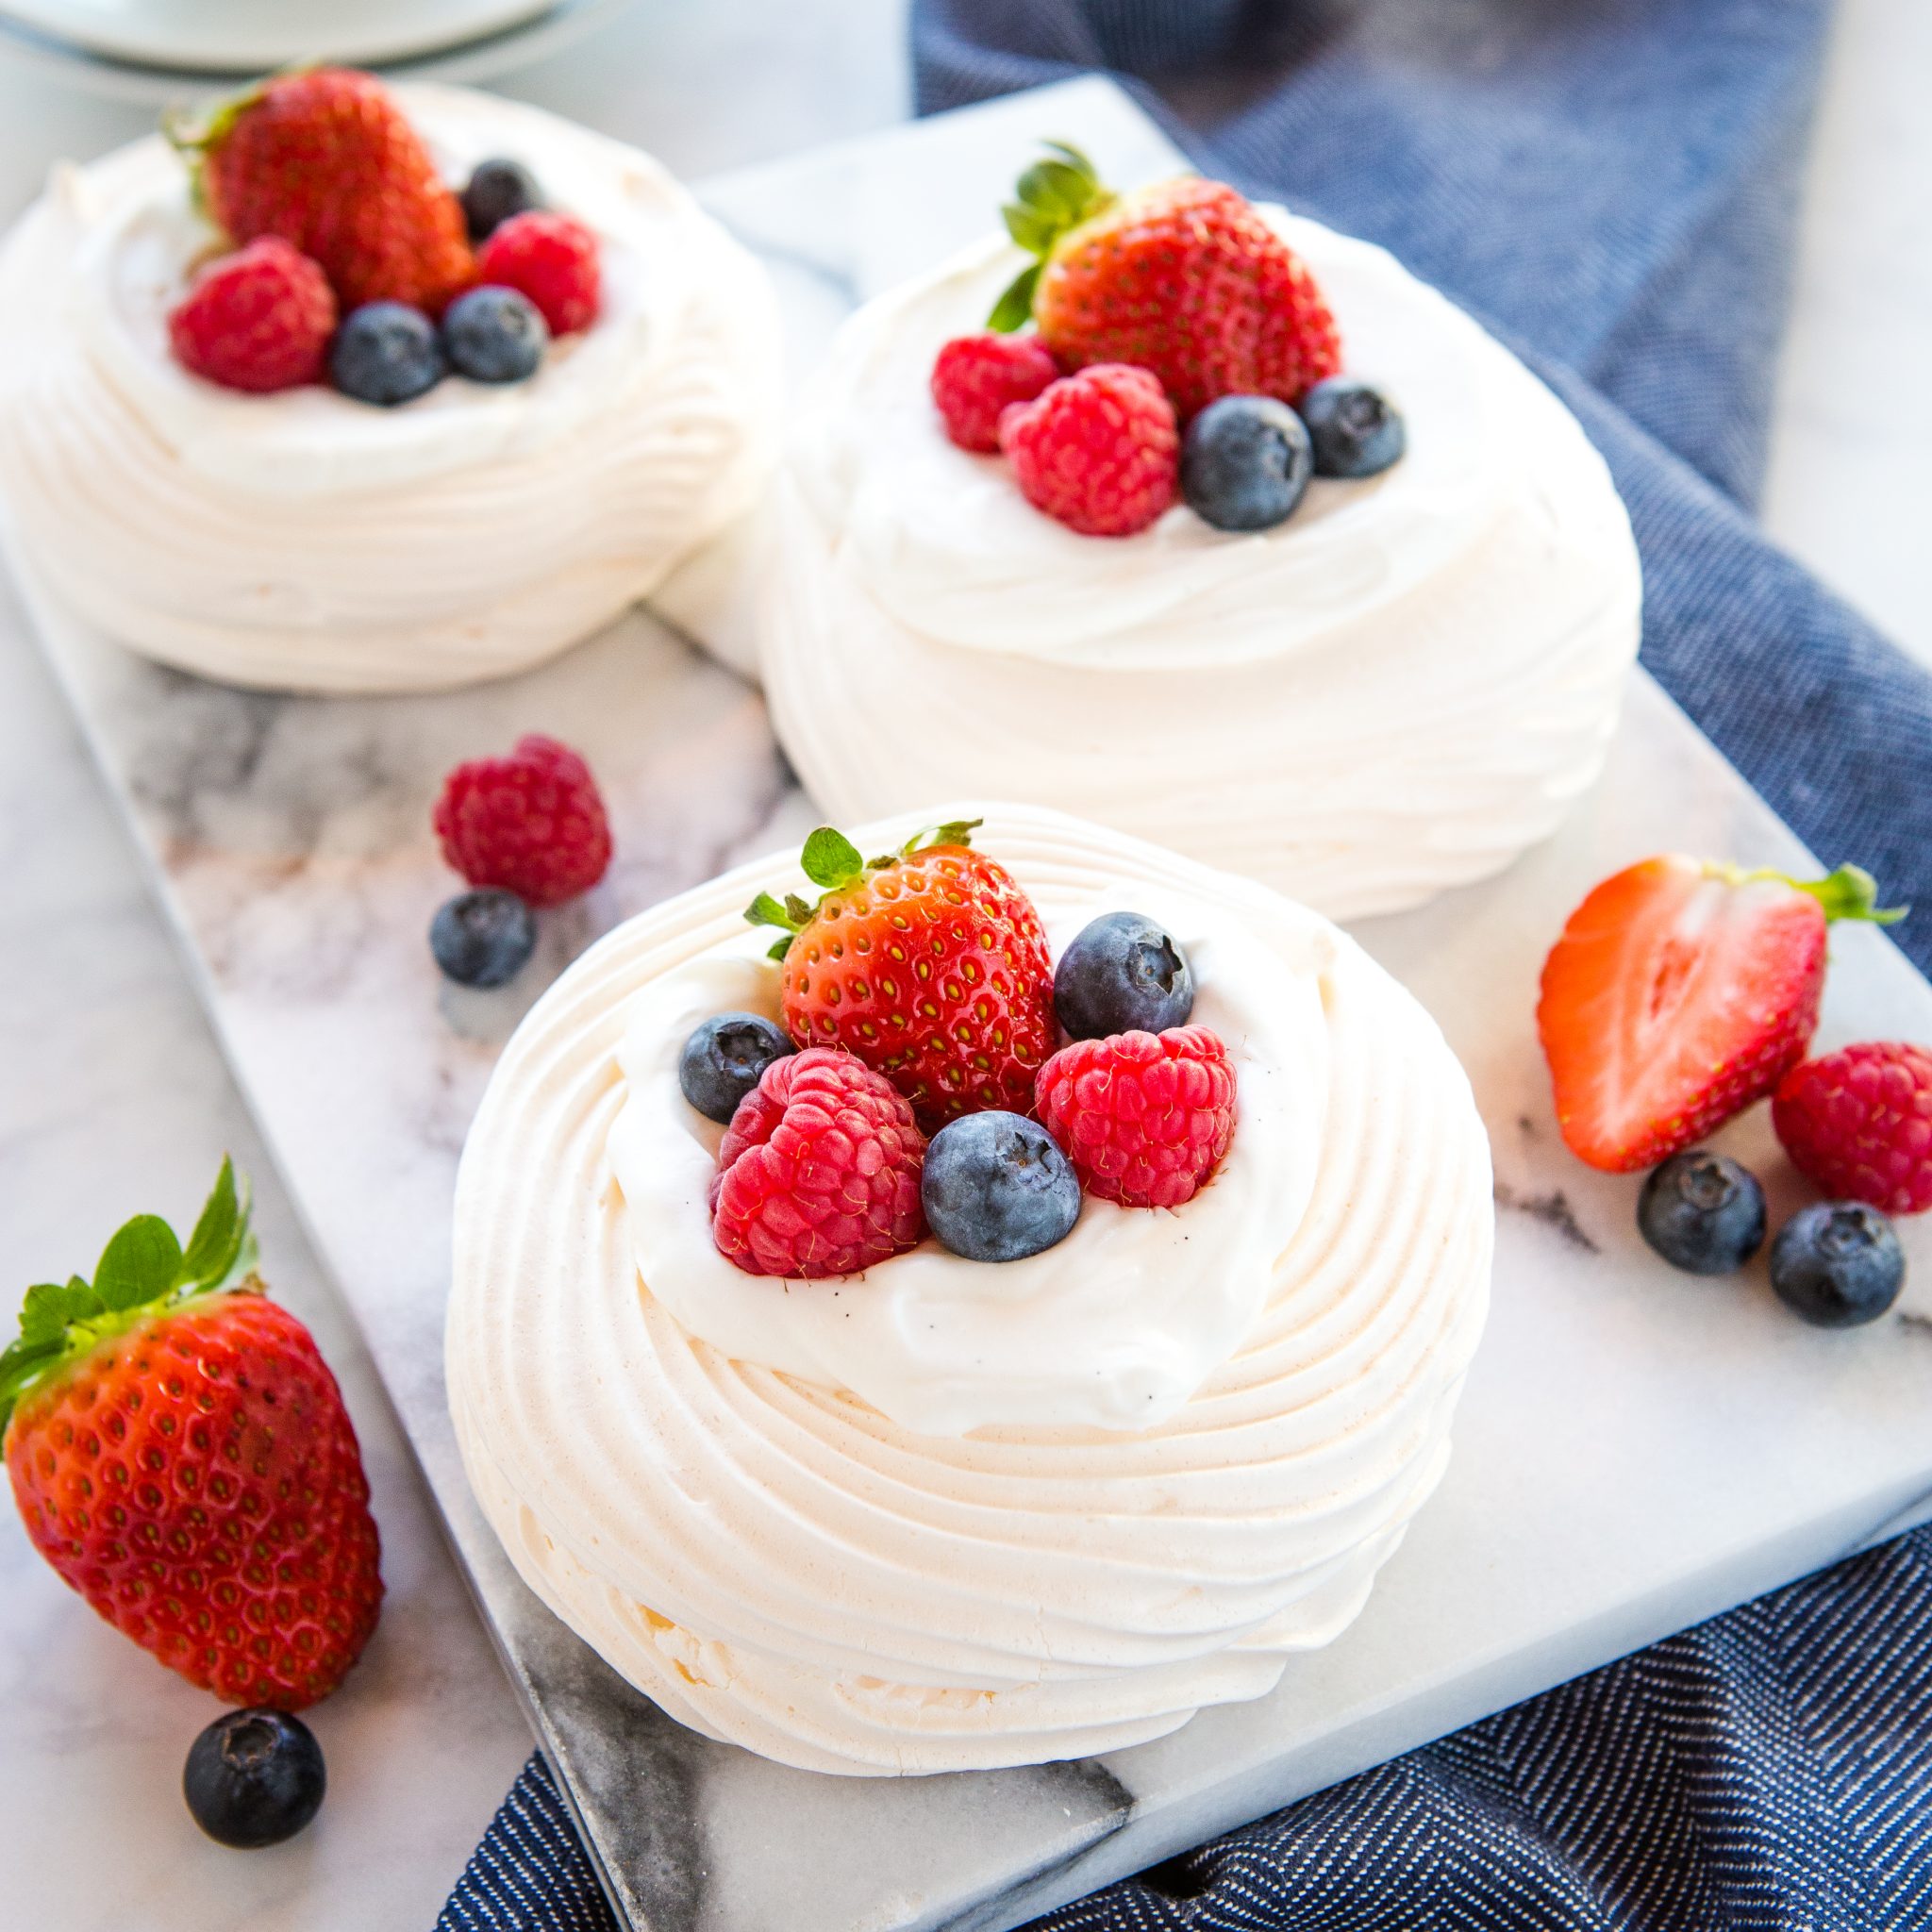 Meringue Nests with Berries and Vanilla Cream - The Busy Baker